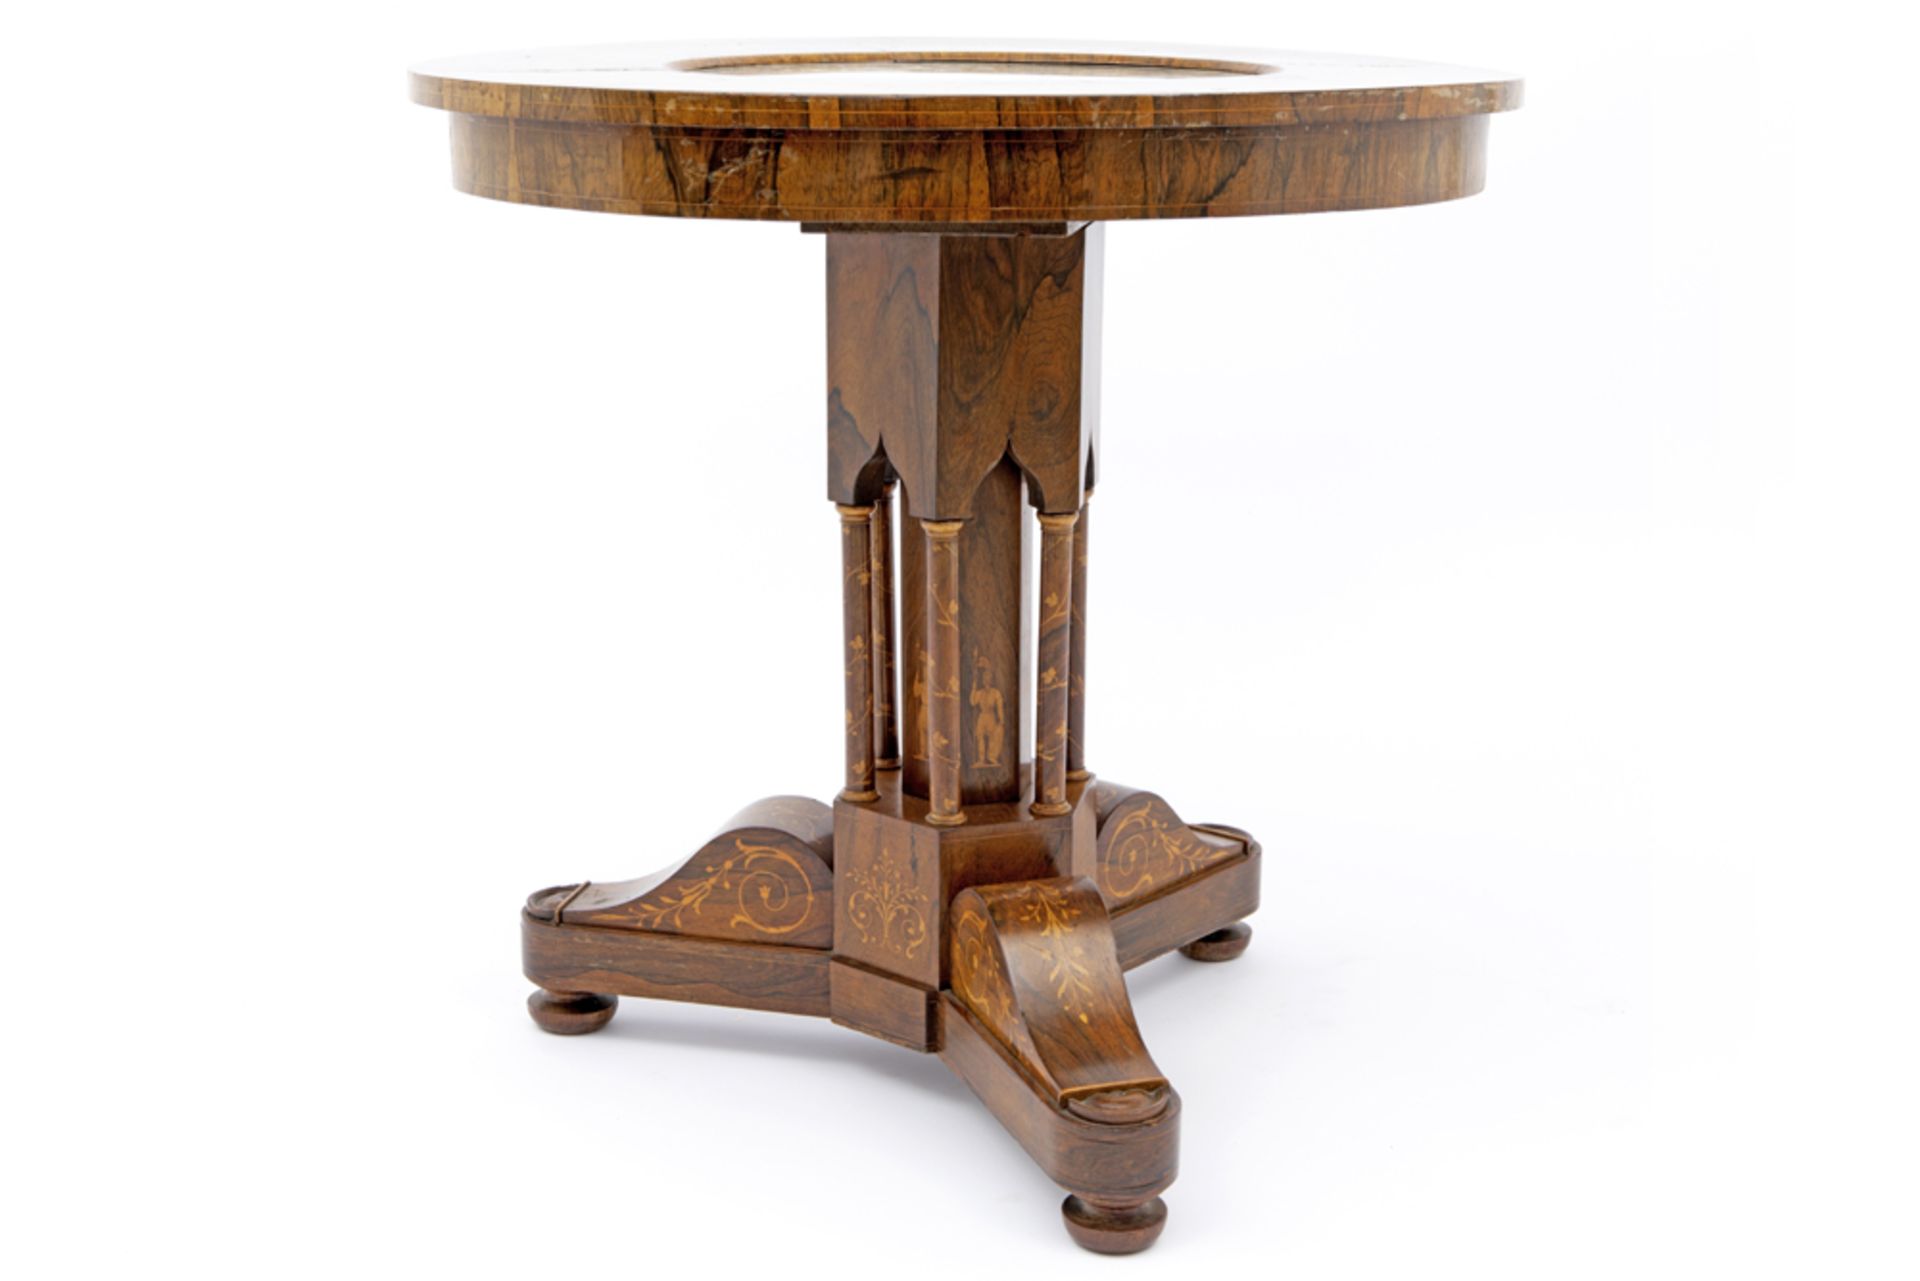 early 19th Cent. French Charles X period neoclassical table in marquetry with an oval top with a